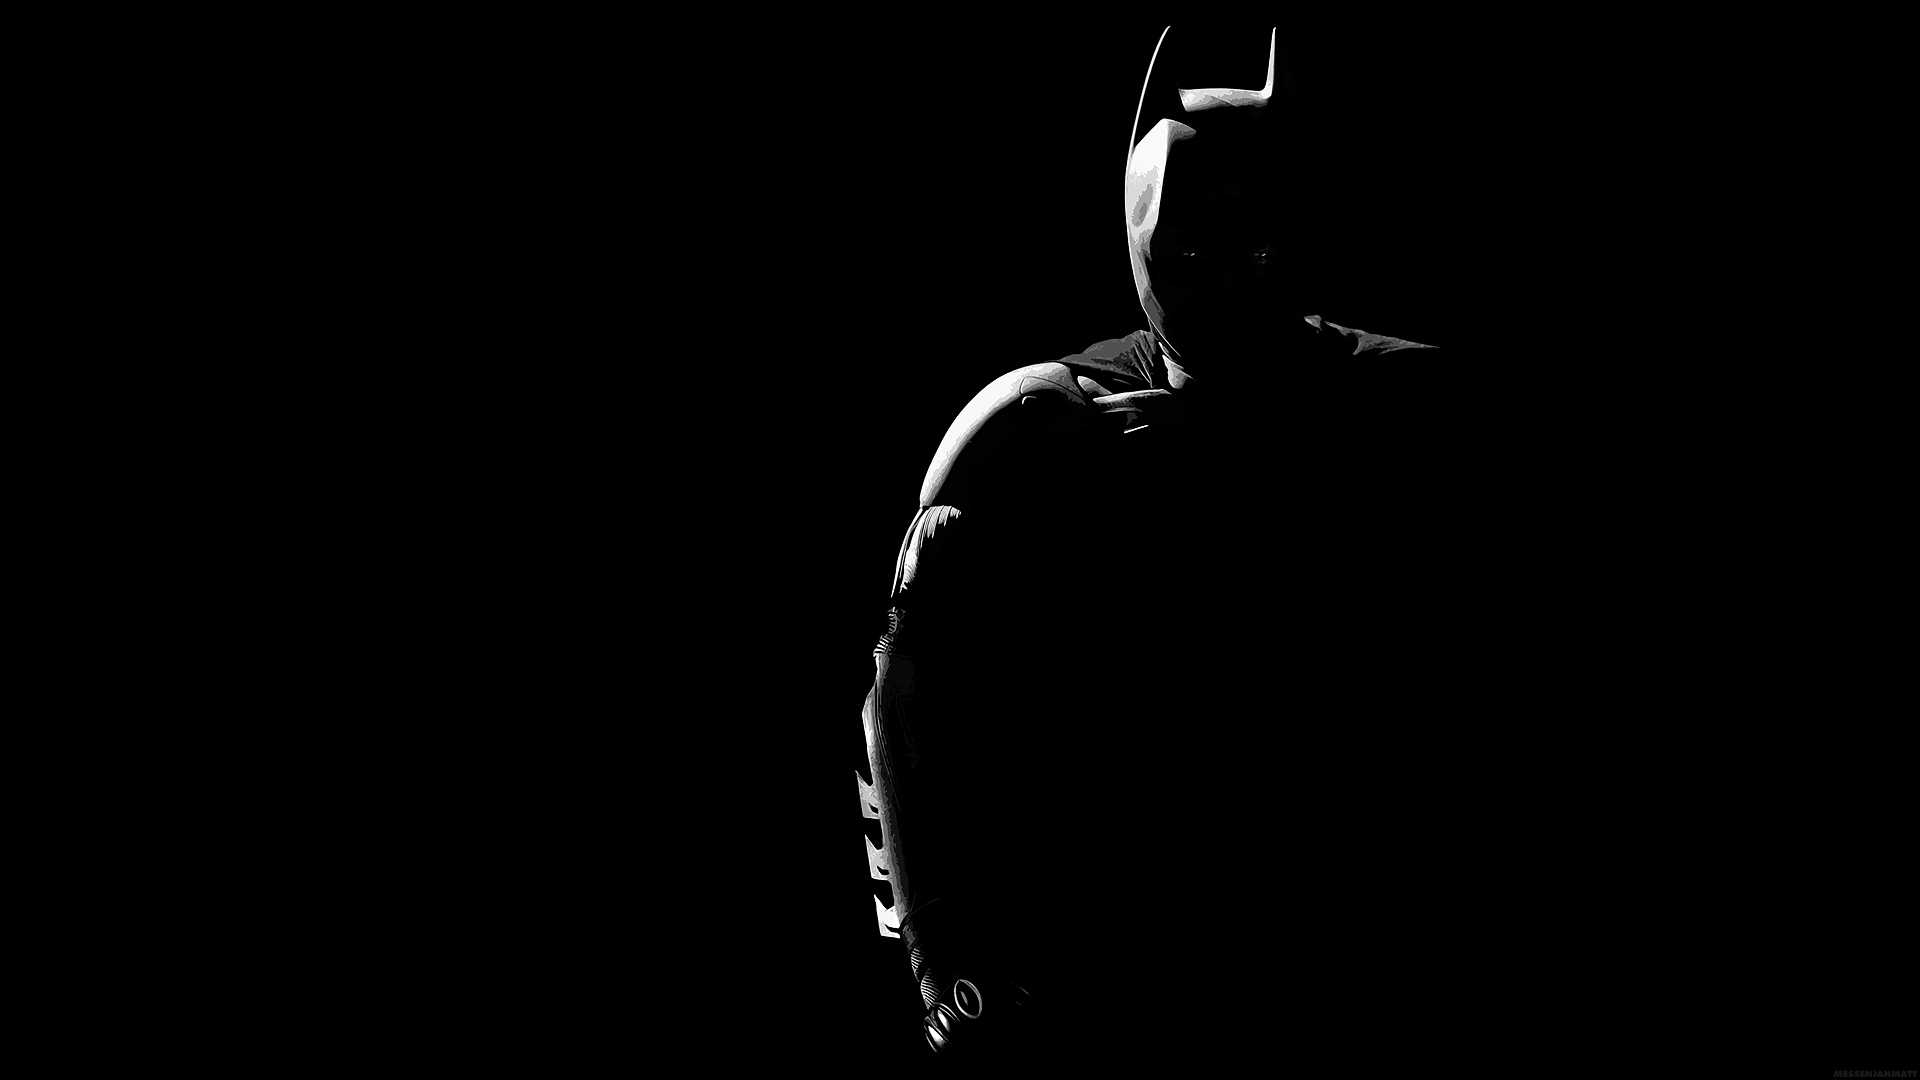 The Dark Knight download the last version for windows